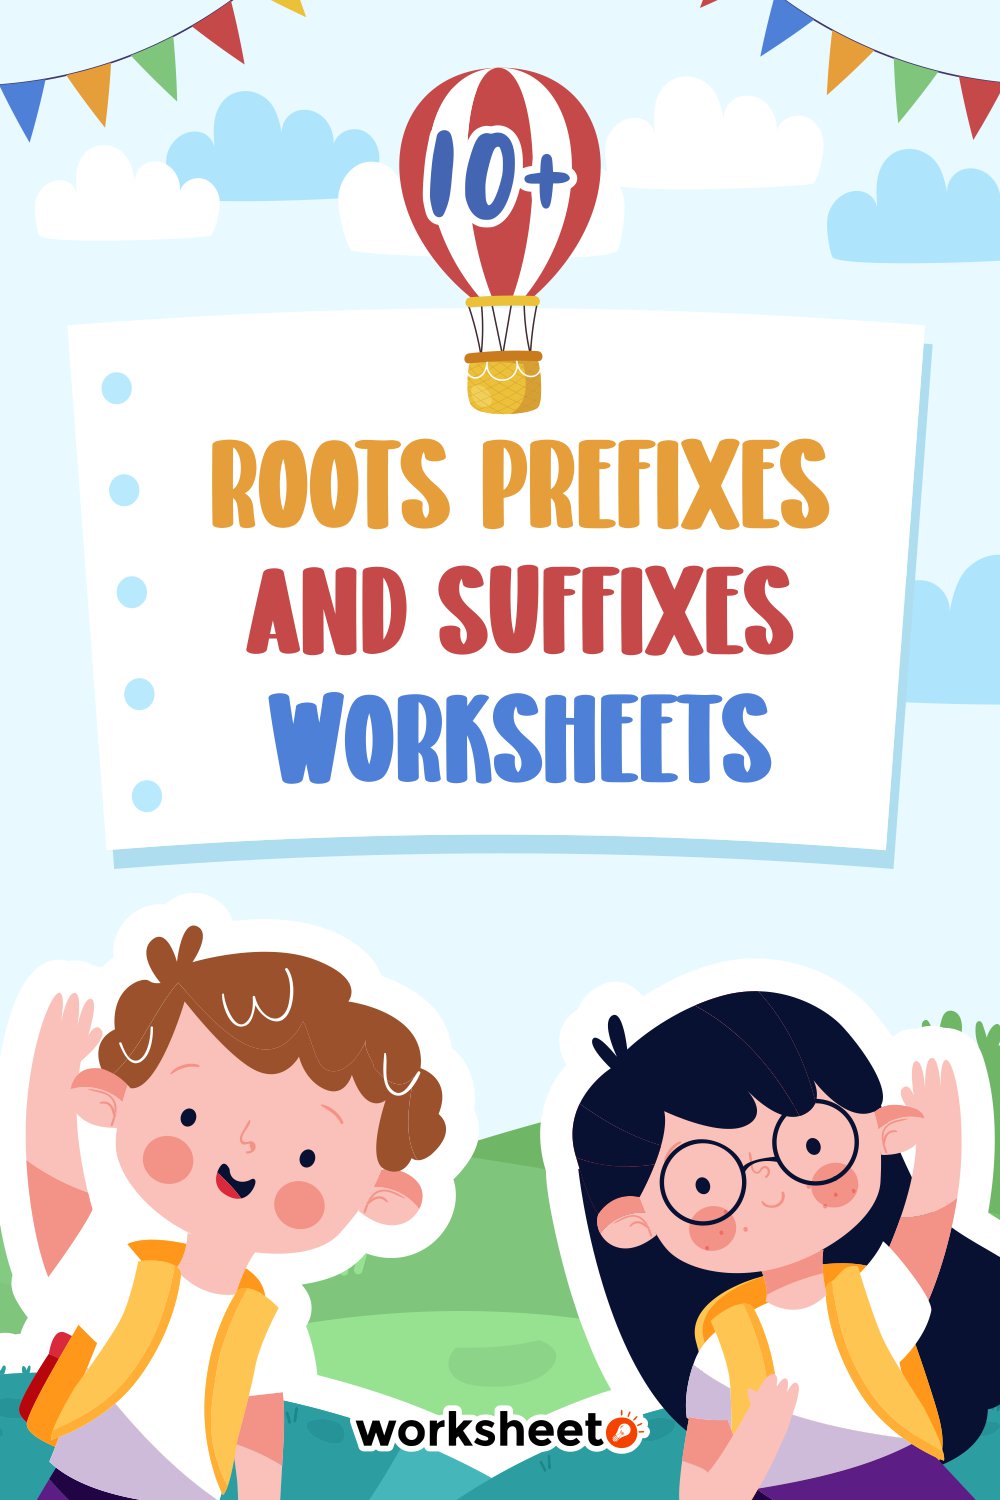 15 Images of Roots Prefixes And Suffixes Worksheets